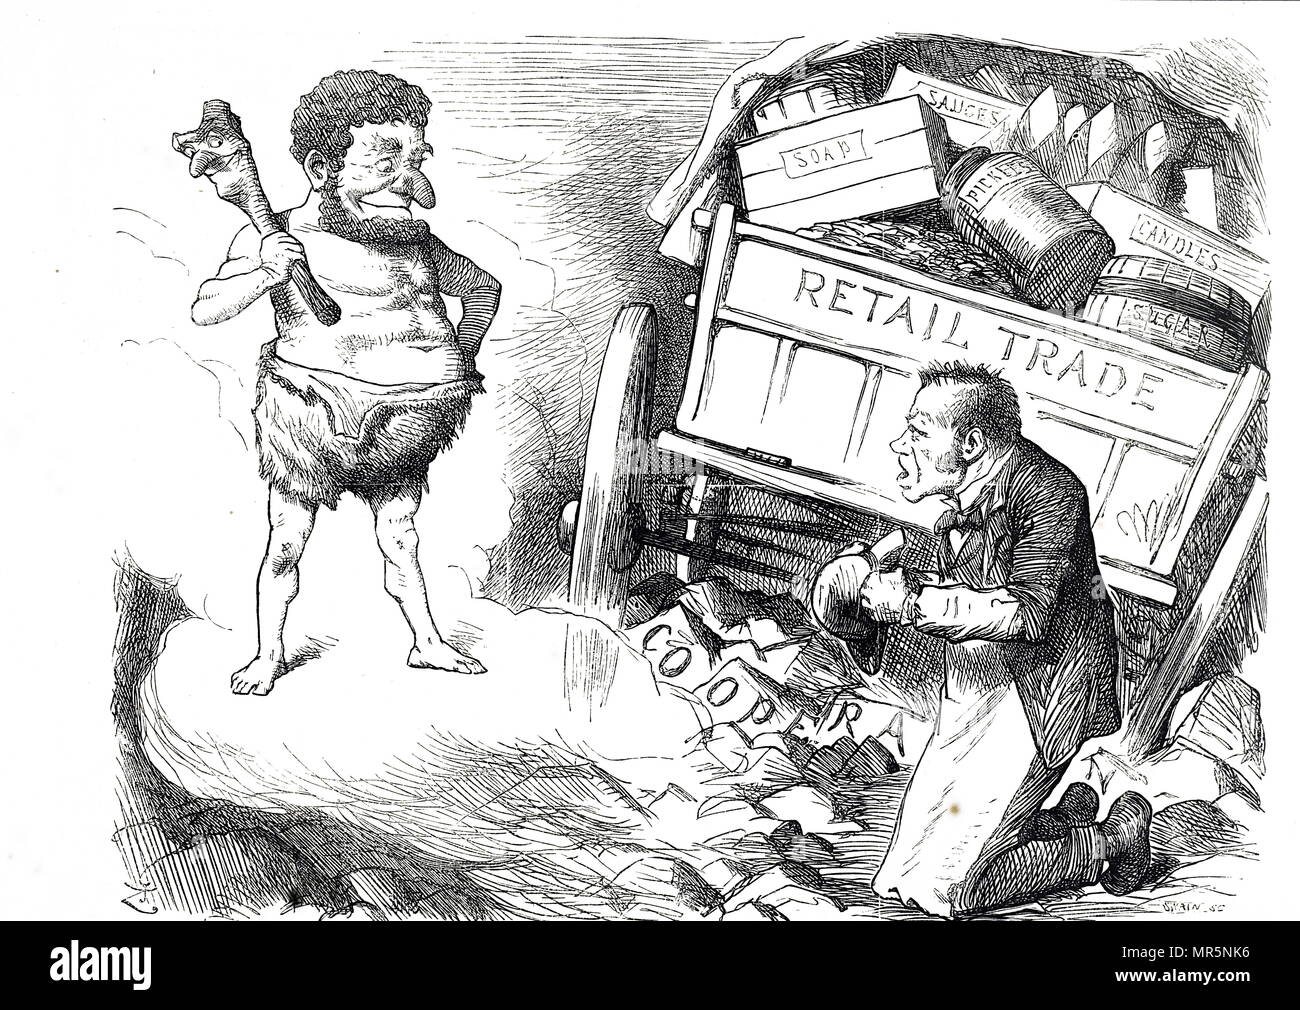 1879 cartoon critical of the co-operative movement. The cooperative movement began in Europe in the 19th century, primarily in Britain and France, Stock Photo